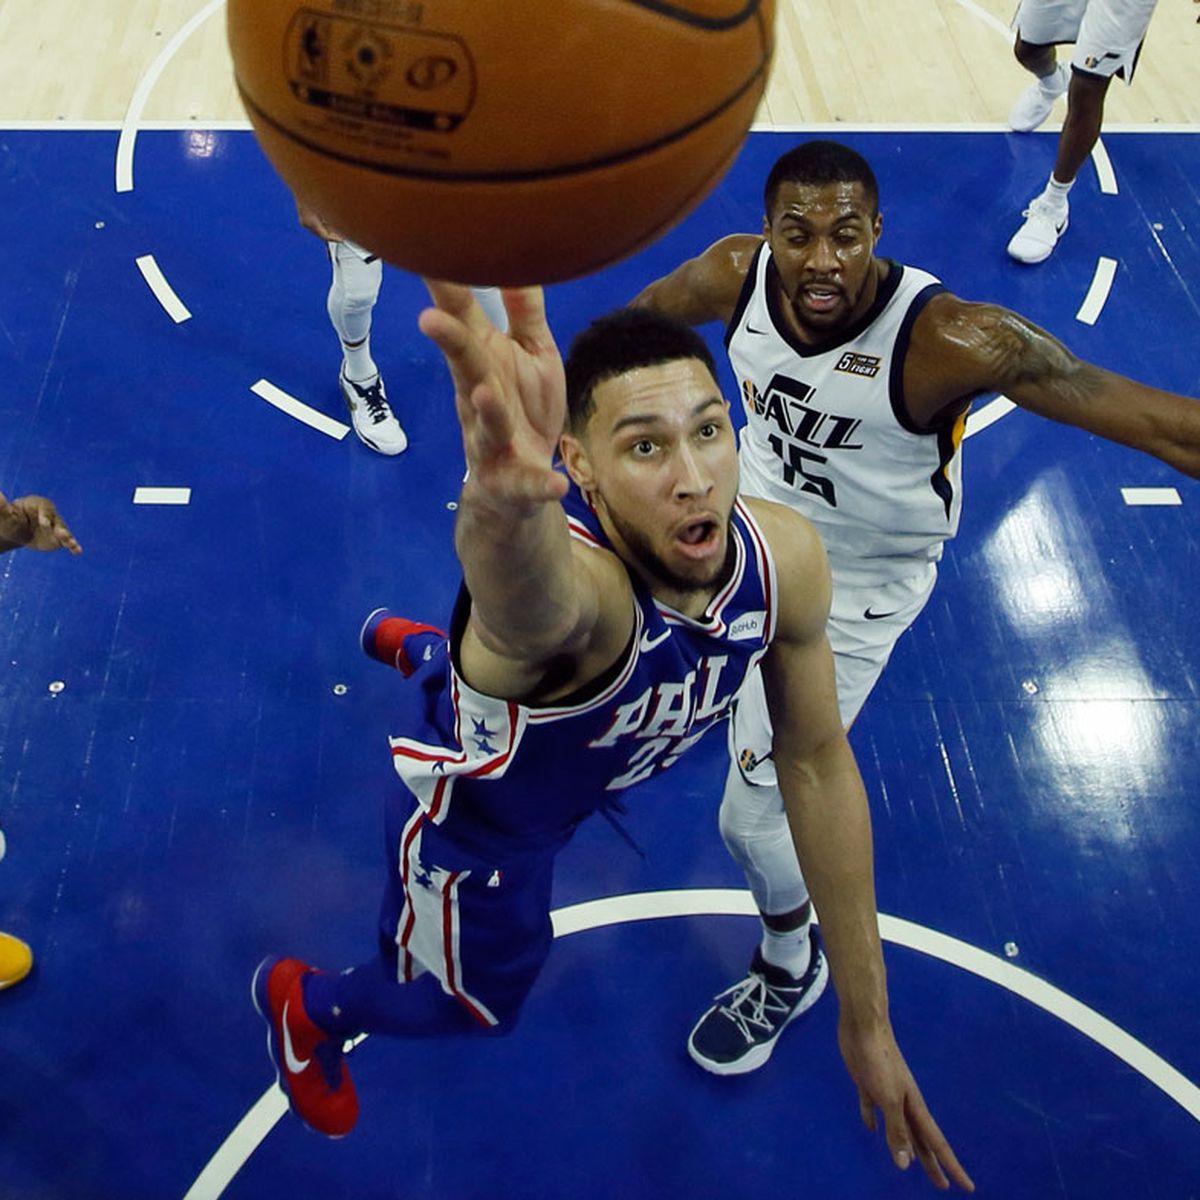 Ben Simmons Wins 2018 NBA Rookie of the Year Award over Donovan